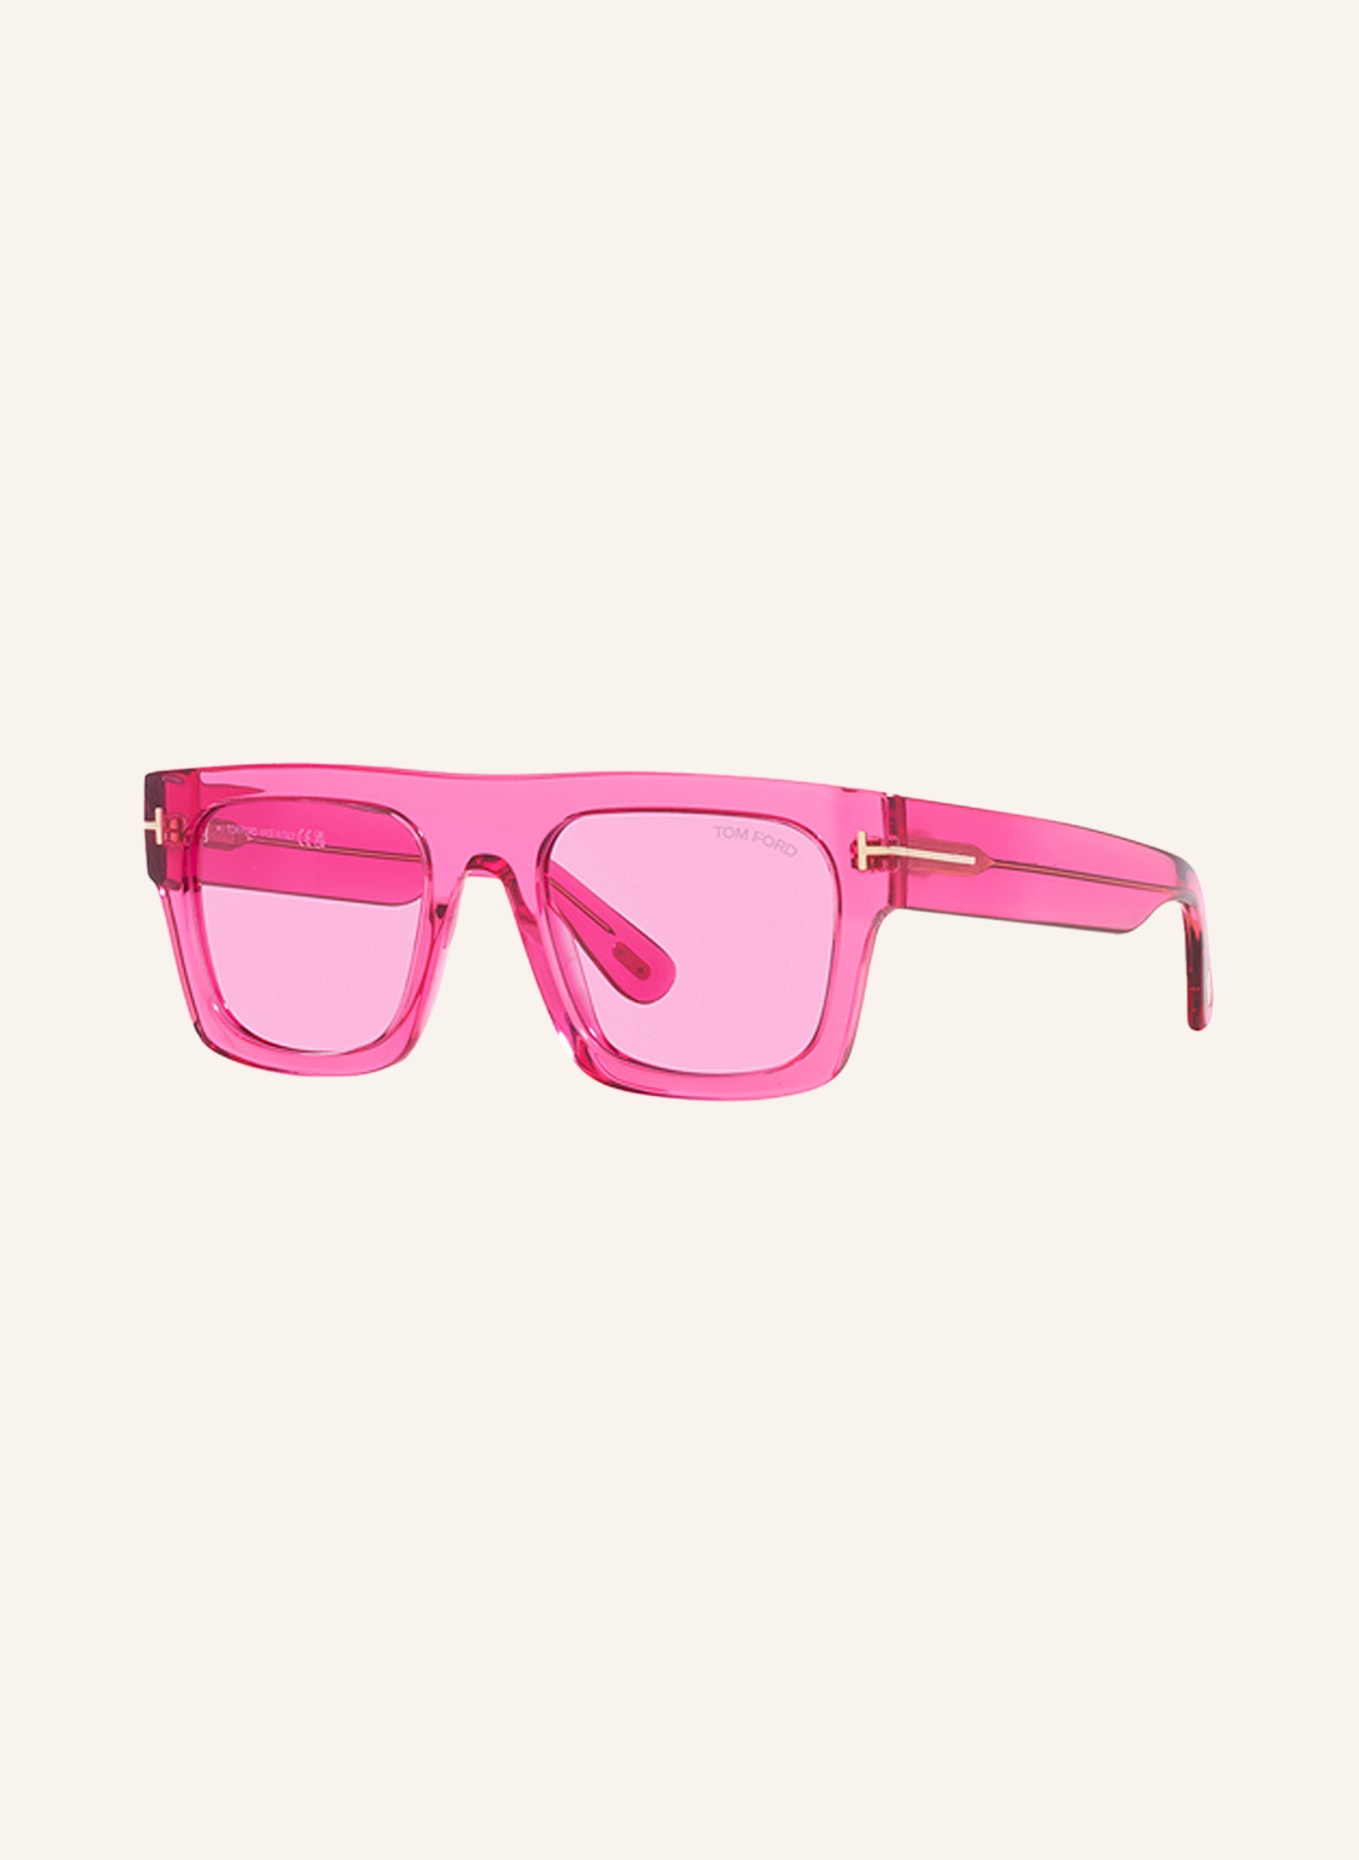 TOM FORD Sonnenbrille FT0711 FAUSTO, Farbe: 3500R1 - PINK/ PINK (Bild 1)